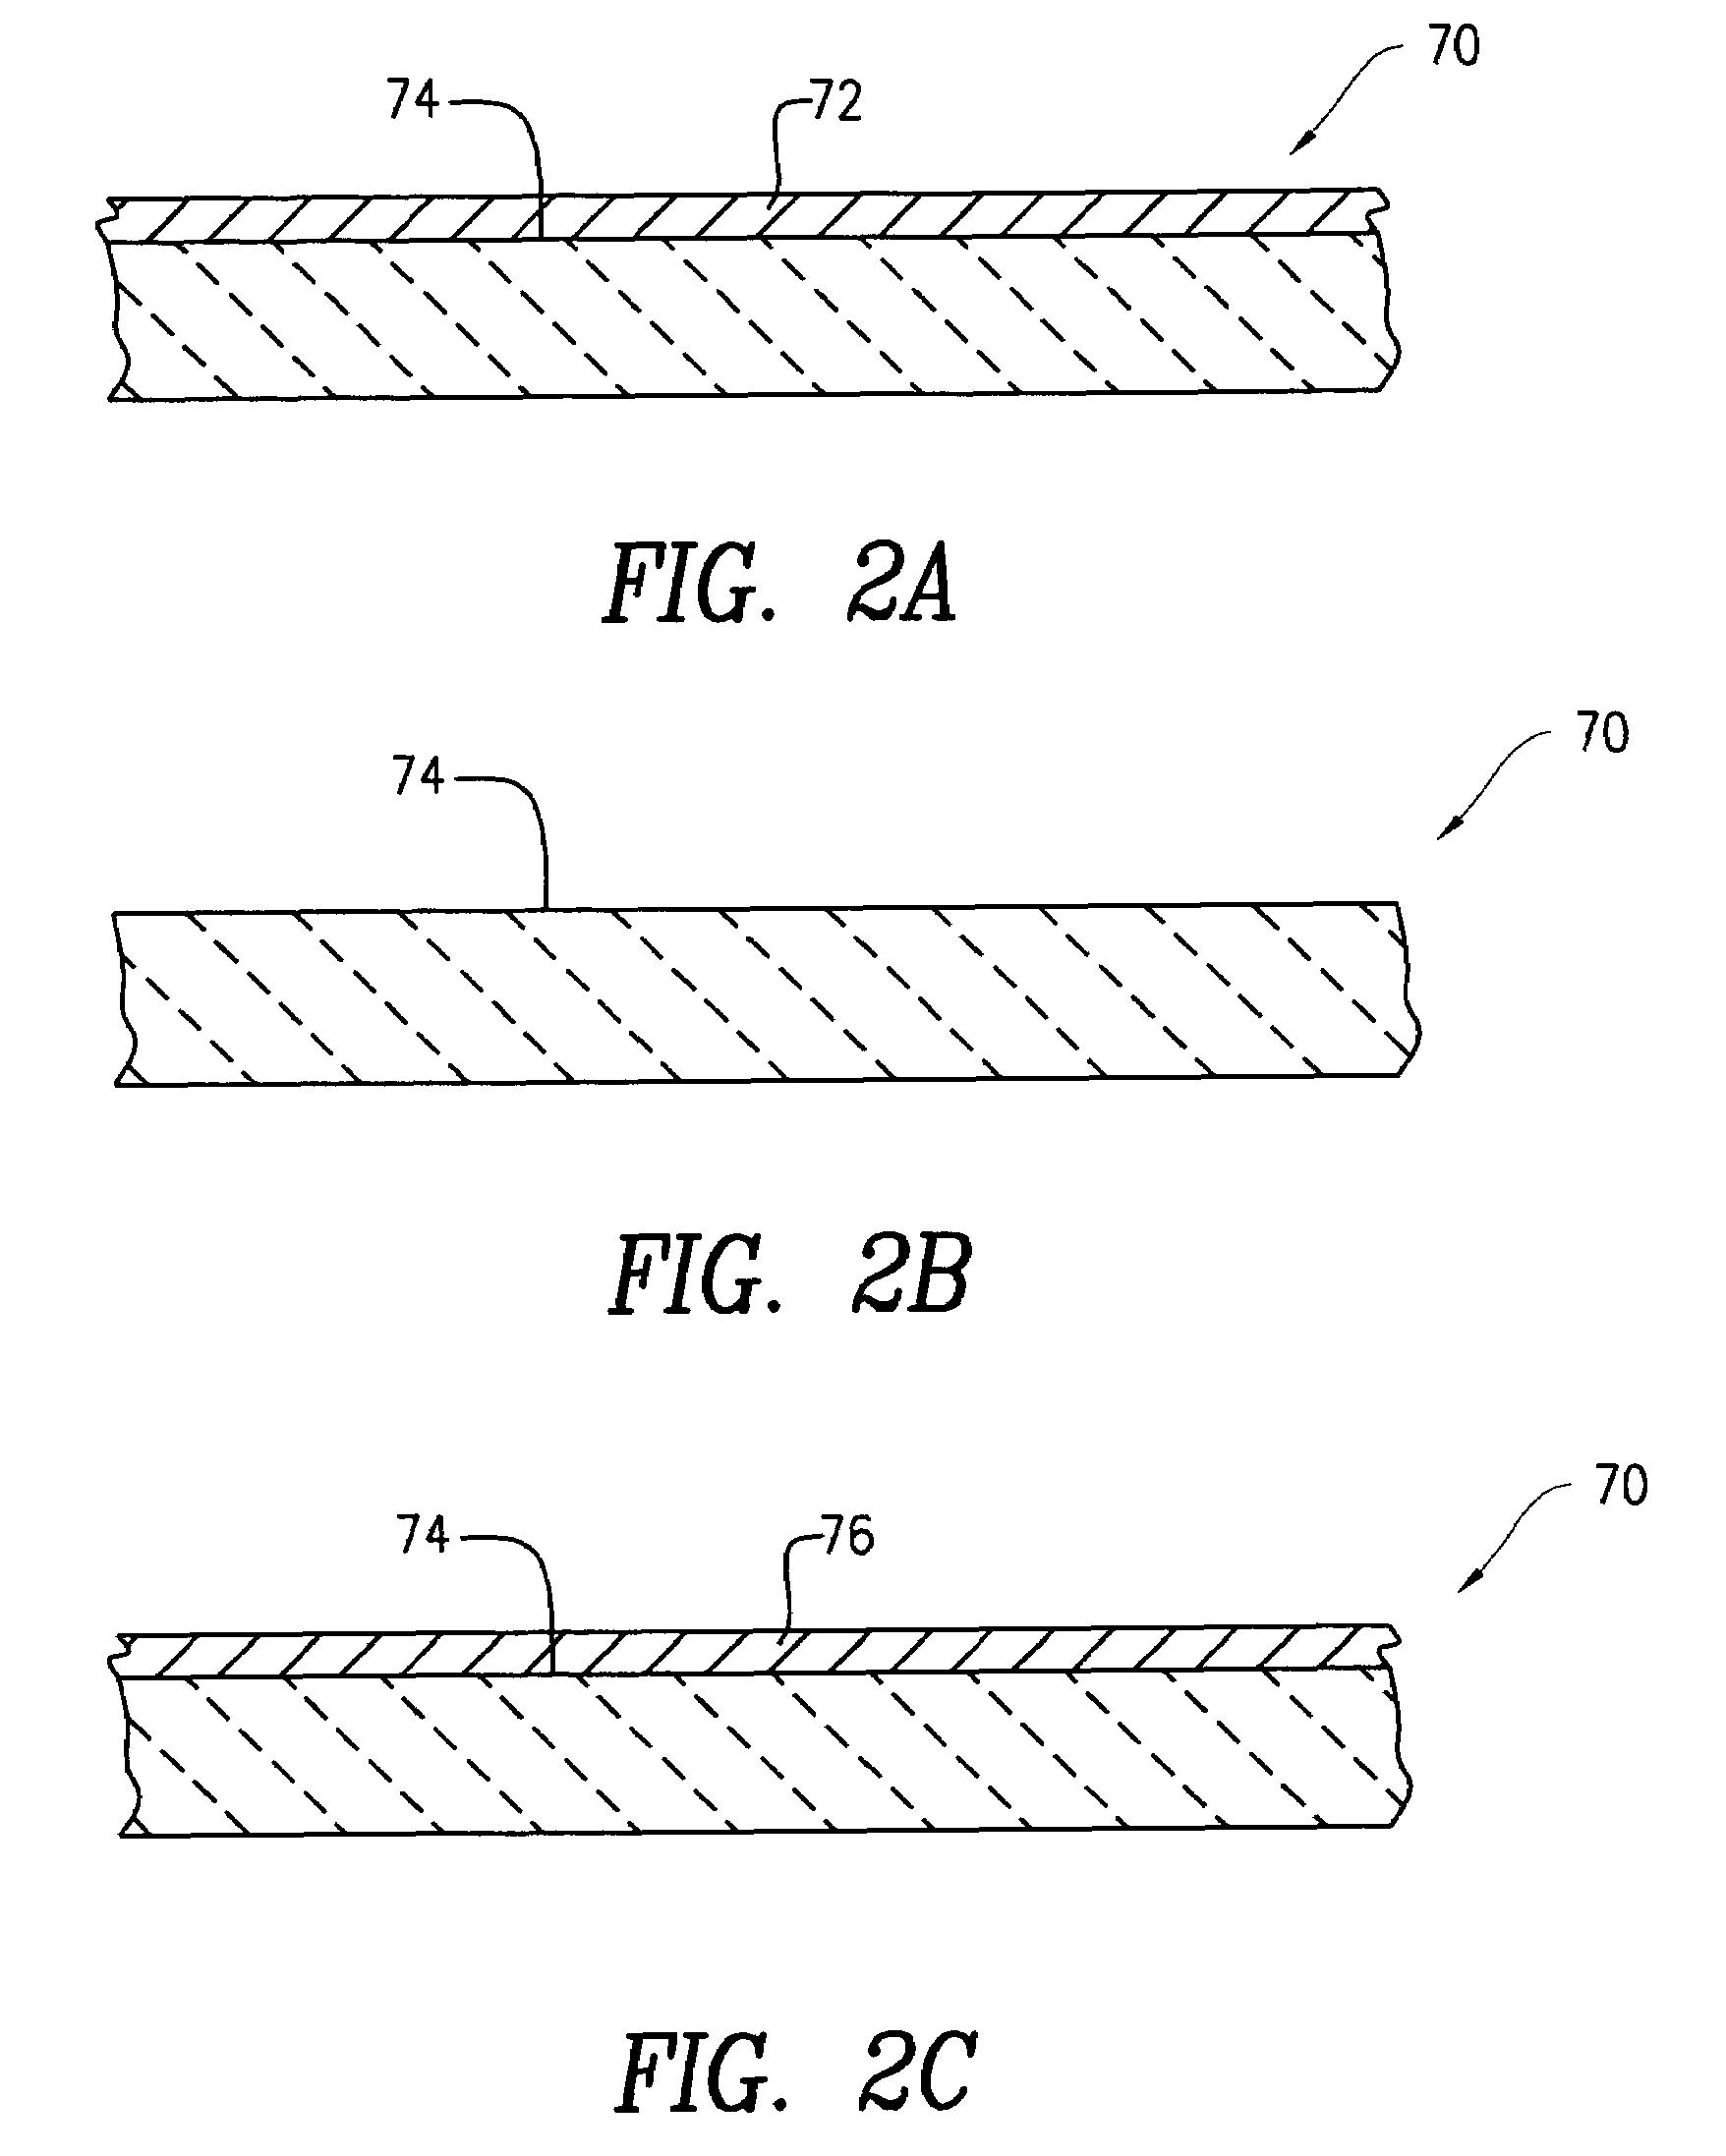 Epitaxial deposition process and apparatus